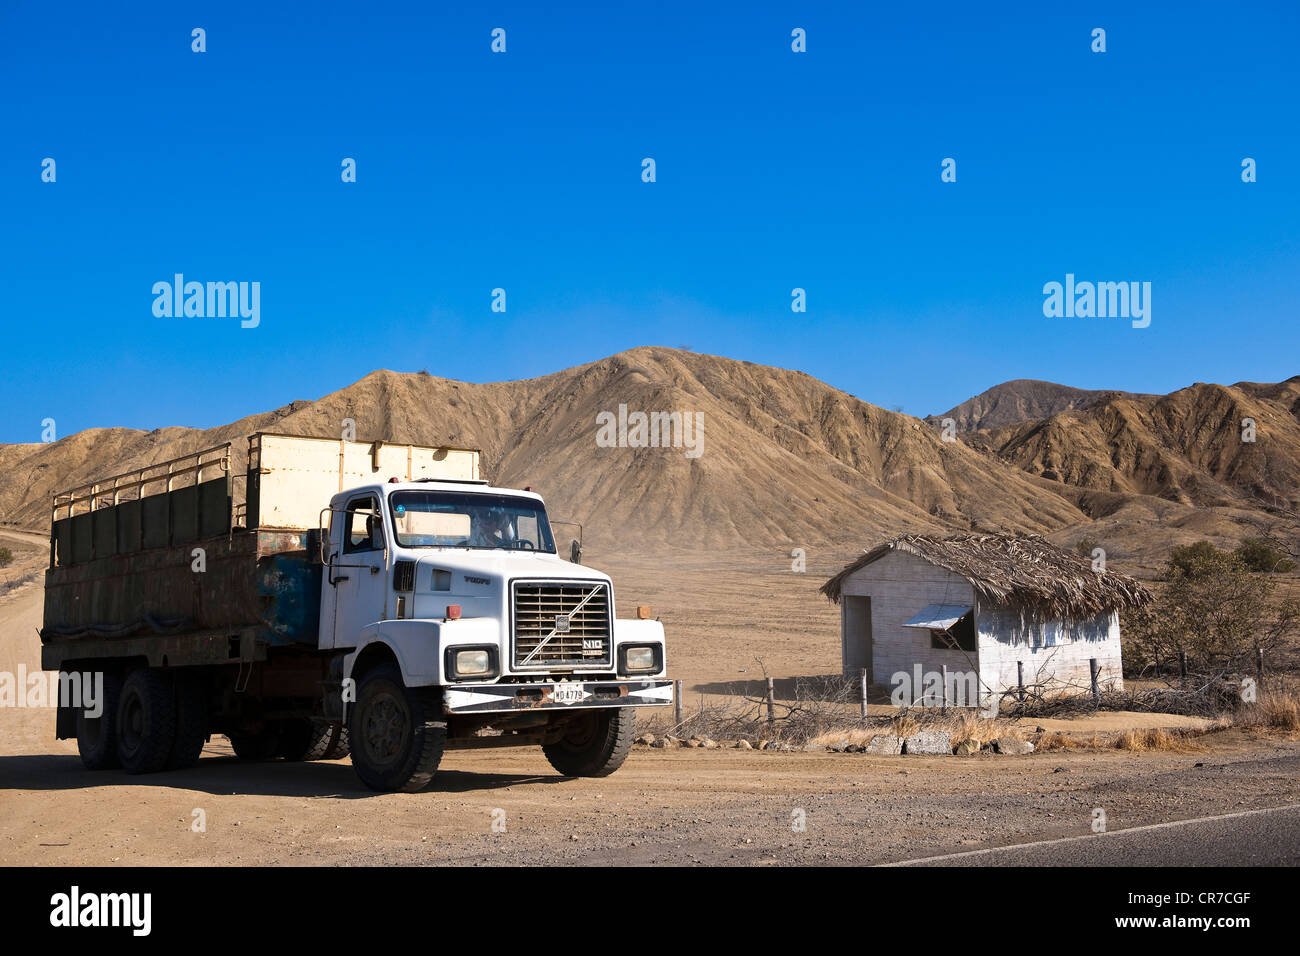 Peru, Piura Province, Cabo Blanco, truck at the edge of the Pan-American Highway Stock Photo